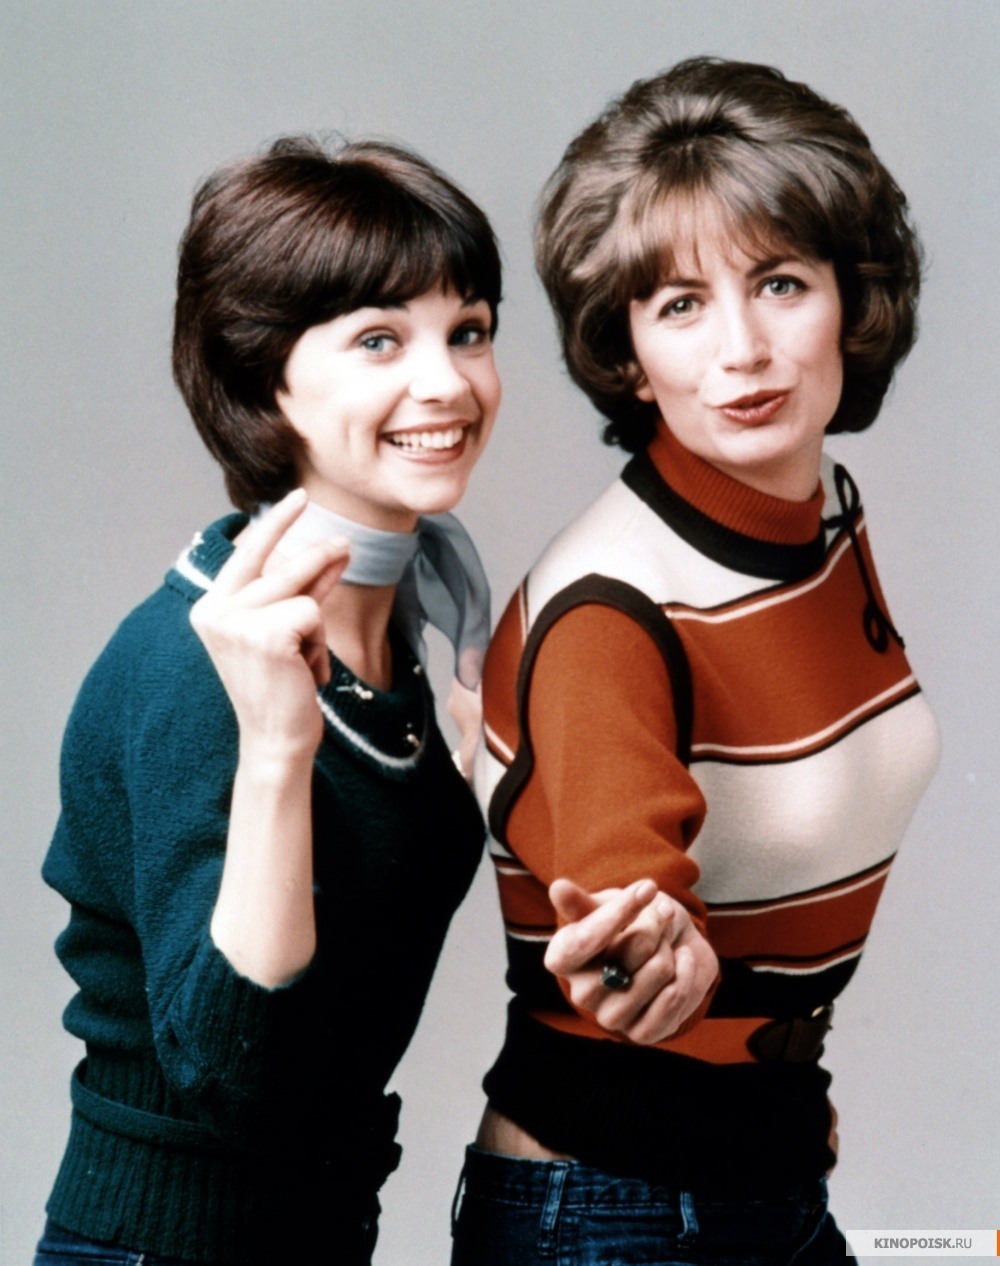 Laverne-and-Shirley-laverne-and-shirley-20163230-1000-1266.jpg